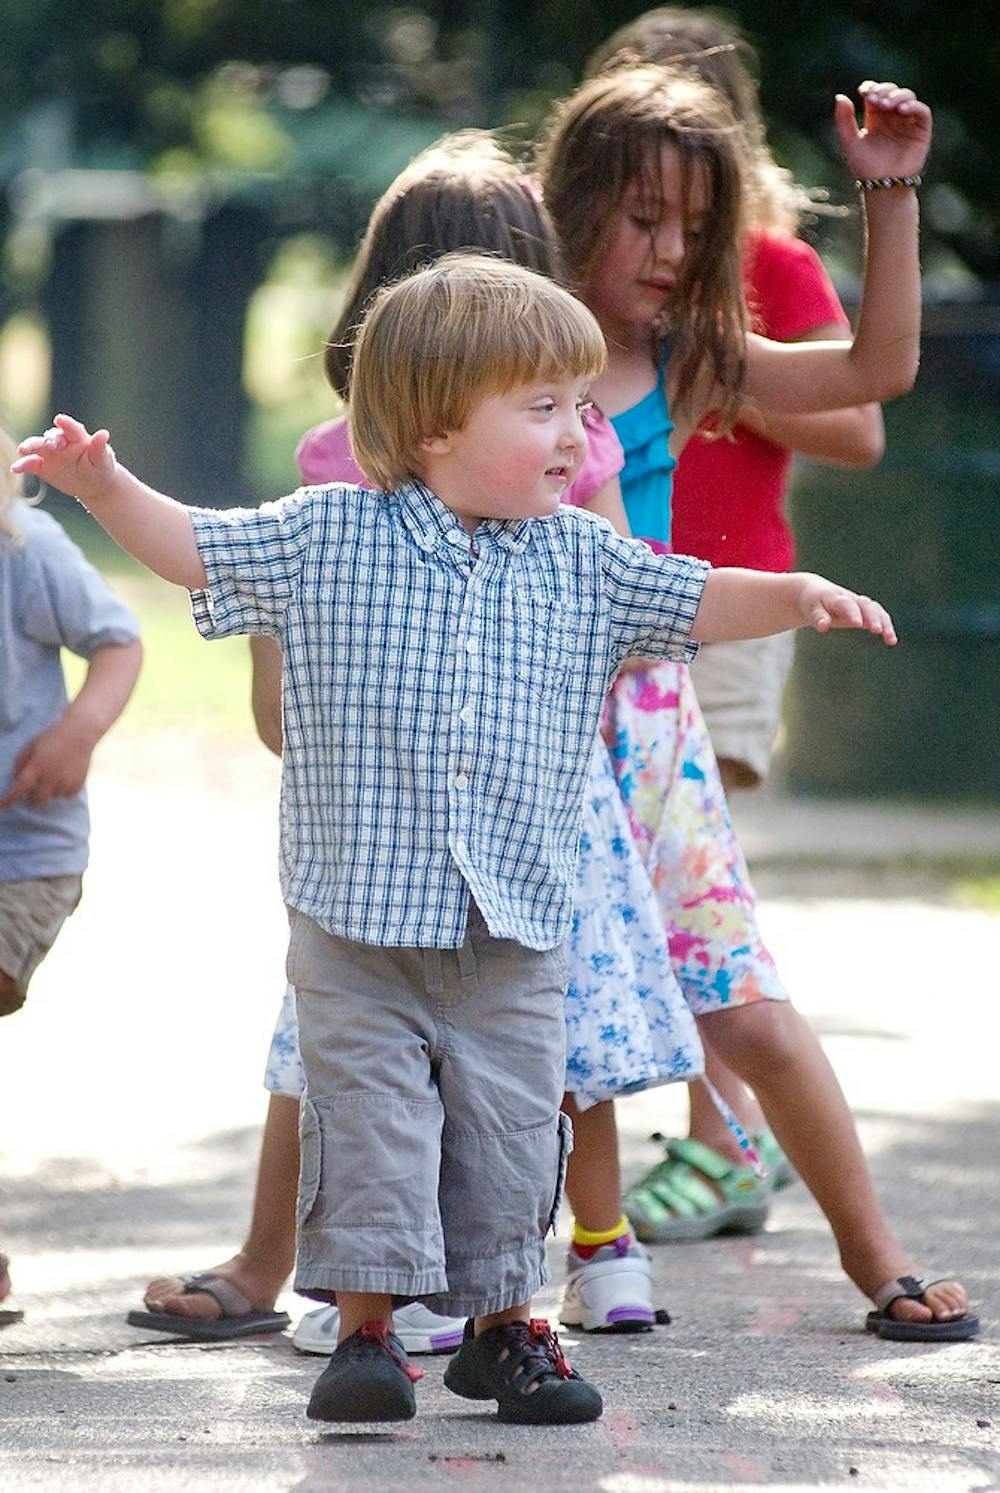 	<p>Charlie Waller, 3, leads friends in a game of hopscotch Wednesday evening at Patriarche Park. The Waller family held a barbecue July 20, 2011 to thank those who have helped them in Charlie&#8217;s battle against Diffuse Intrinsic Pontine Glioma, or <span class="caps">DIPG</span>, a rare form of brain cancer. Matt Radick/The State News</p>